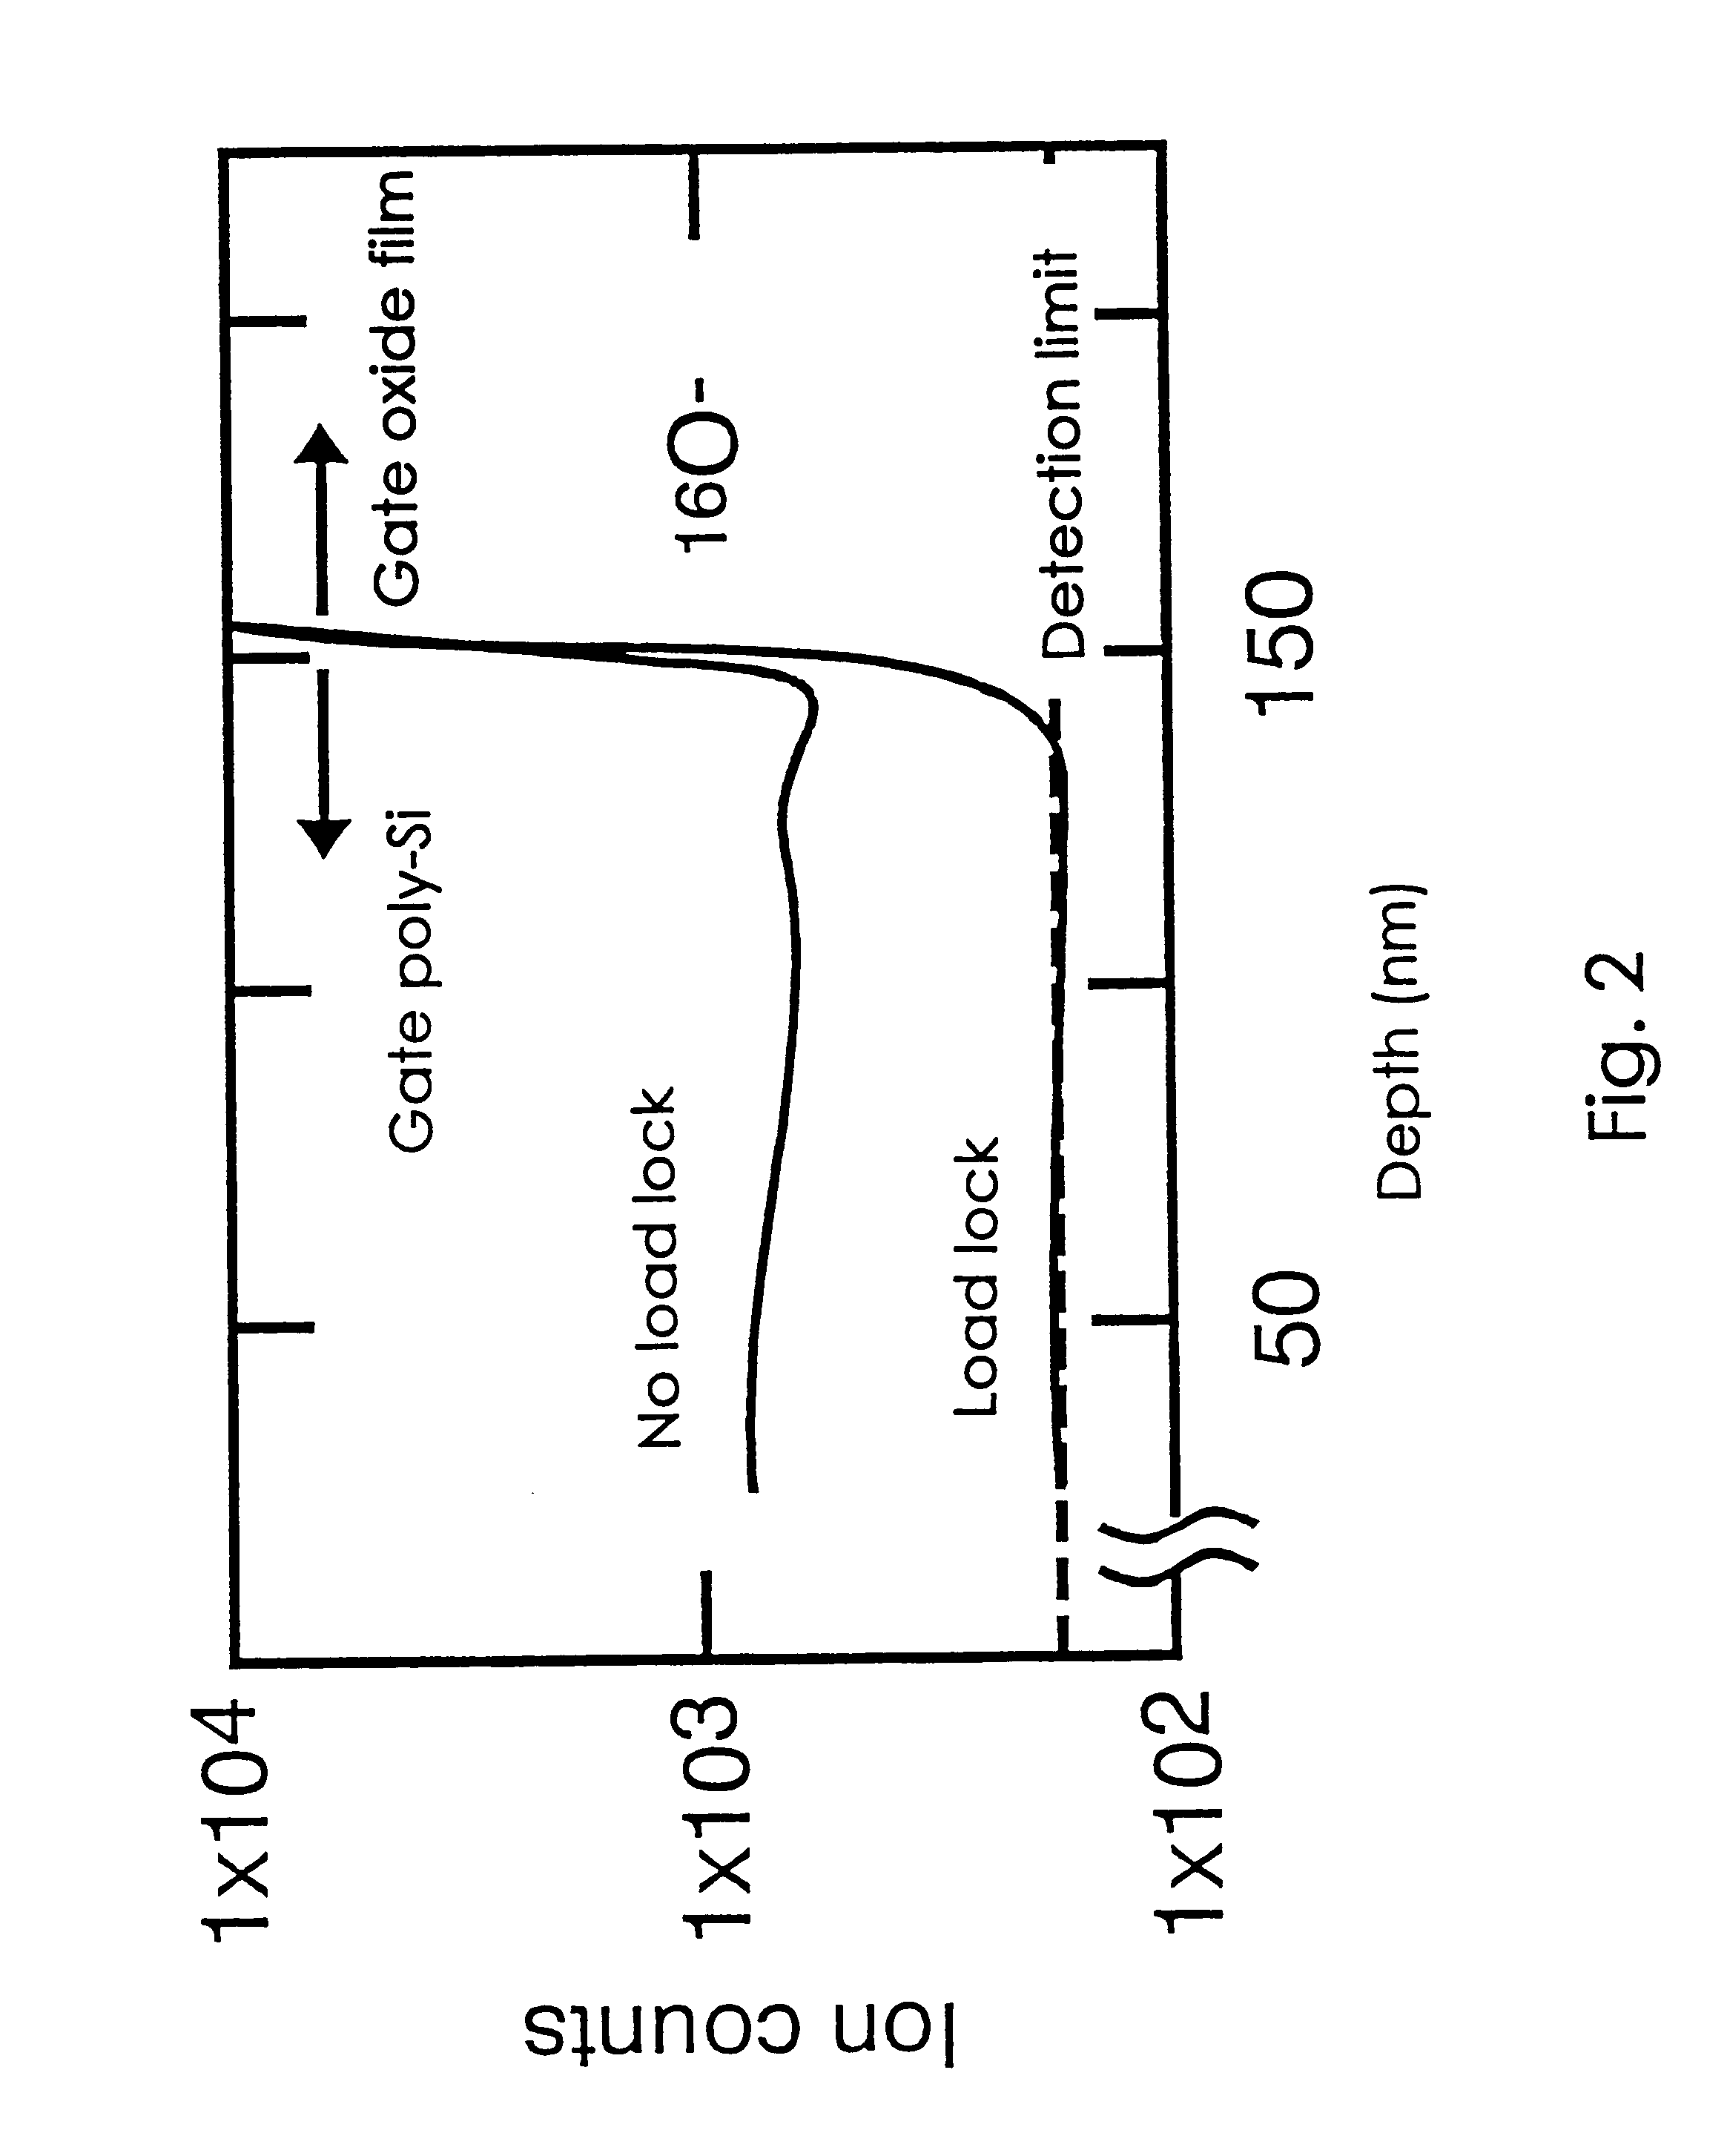 Semiconductor device having junction depths for reducing short channel effect